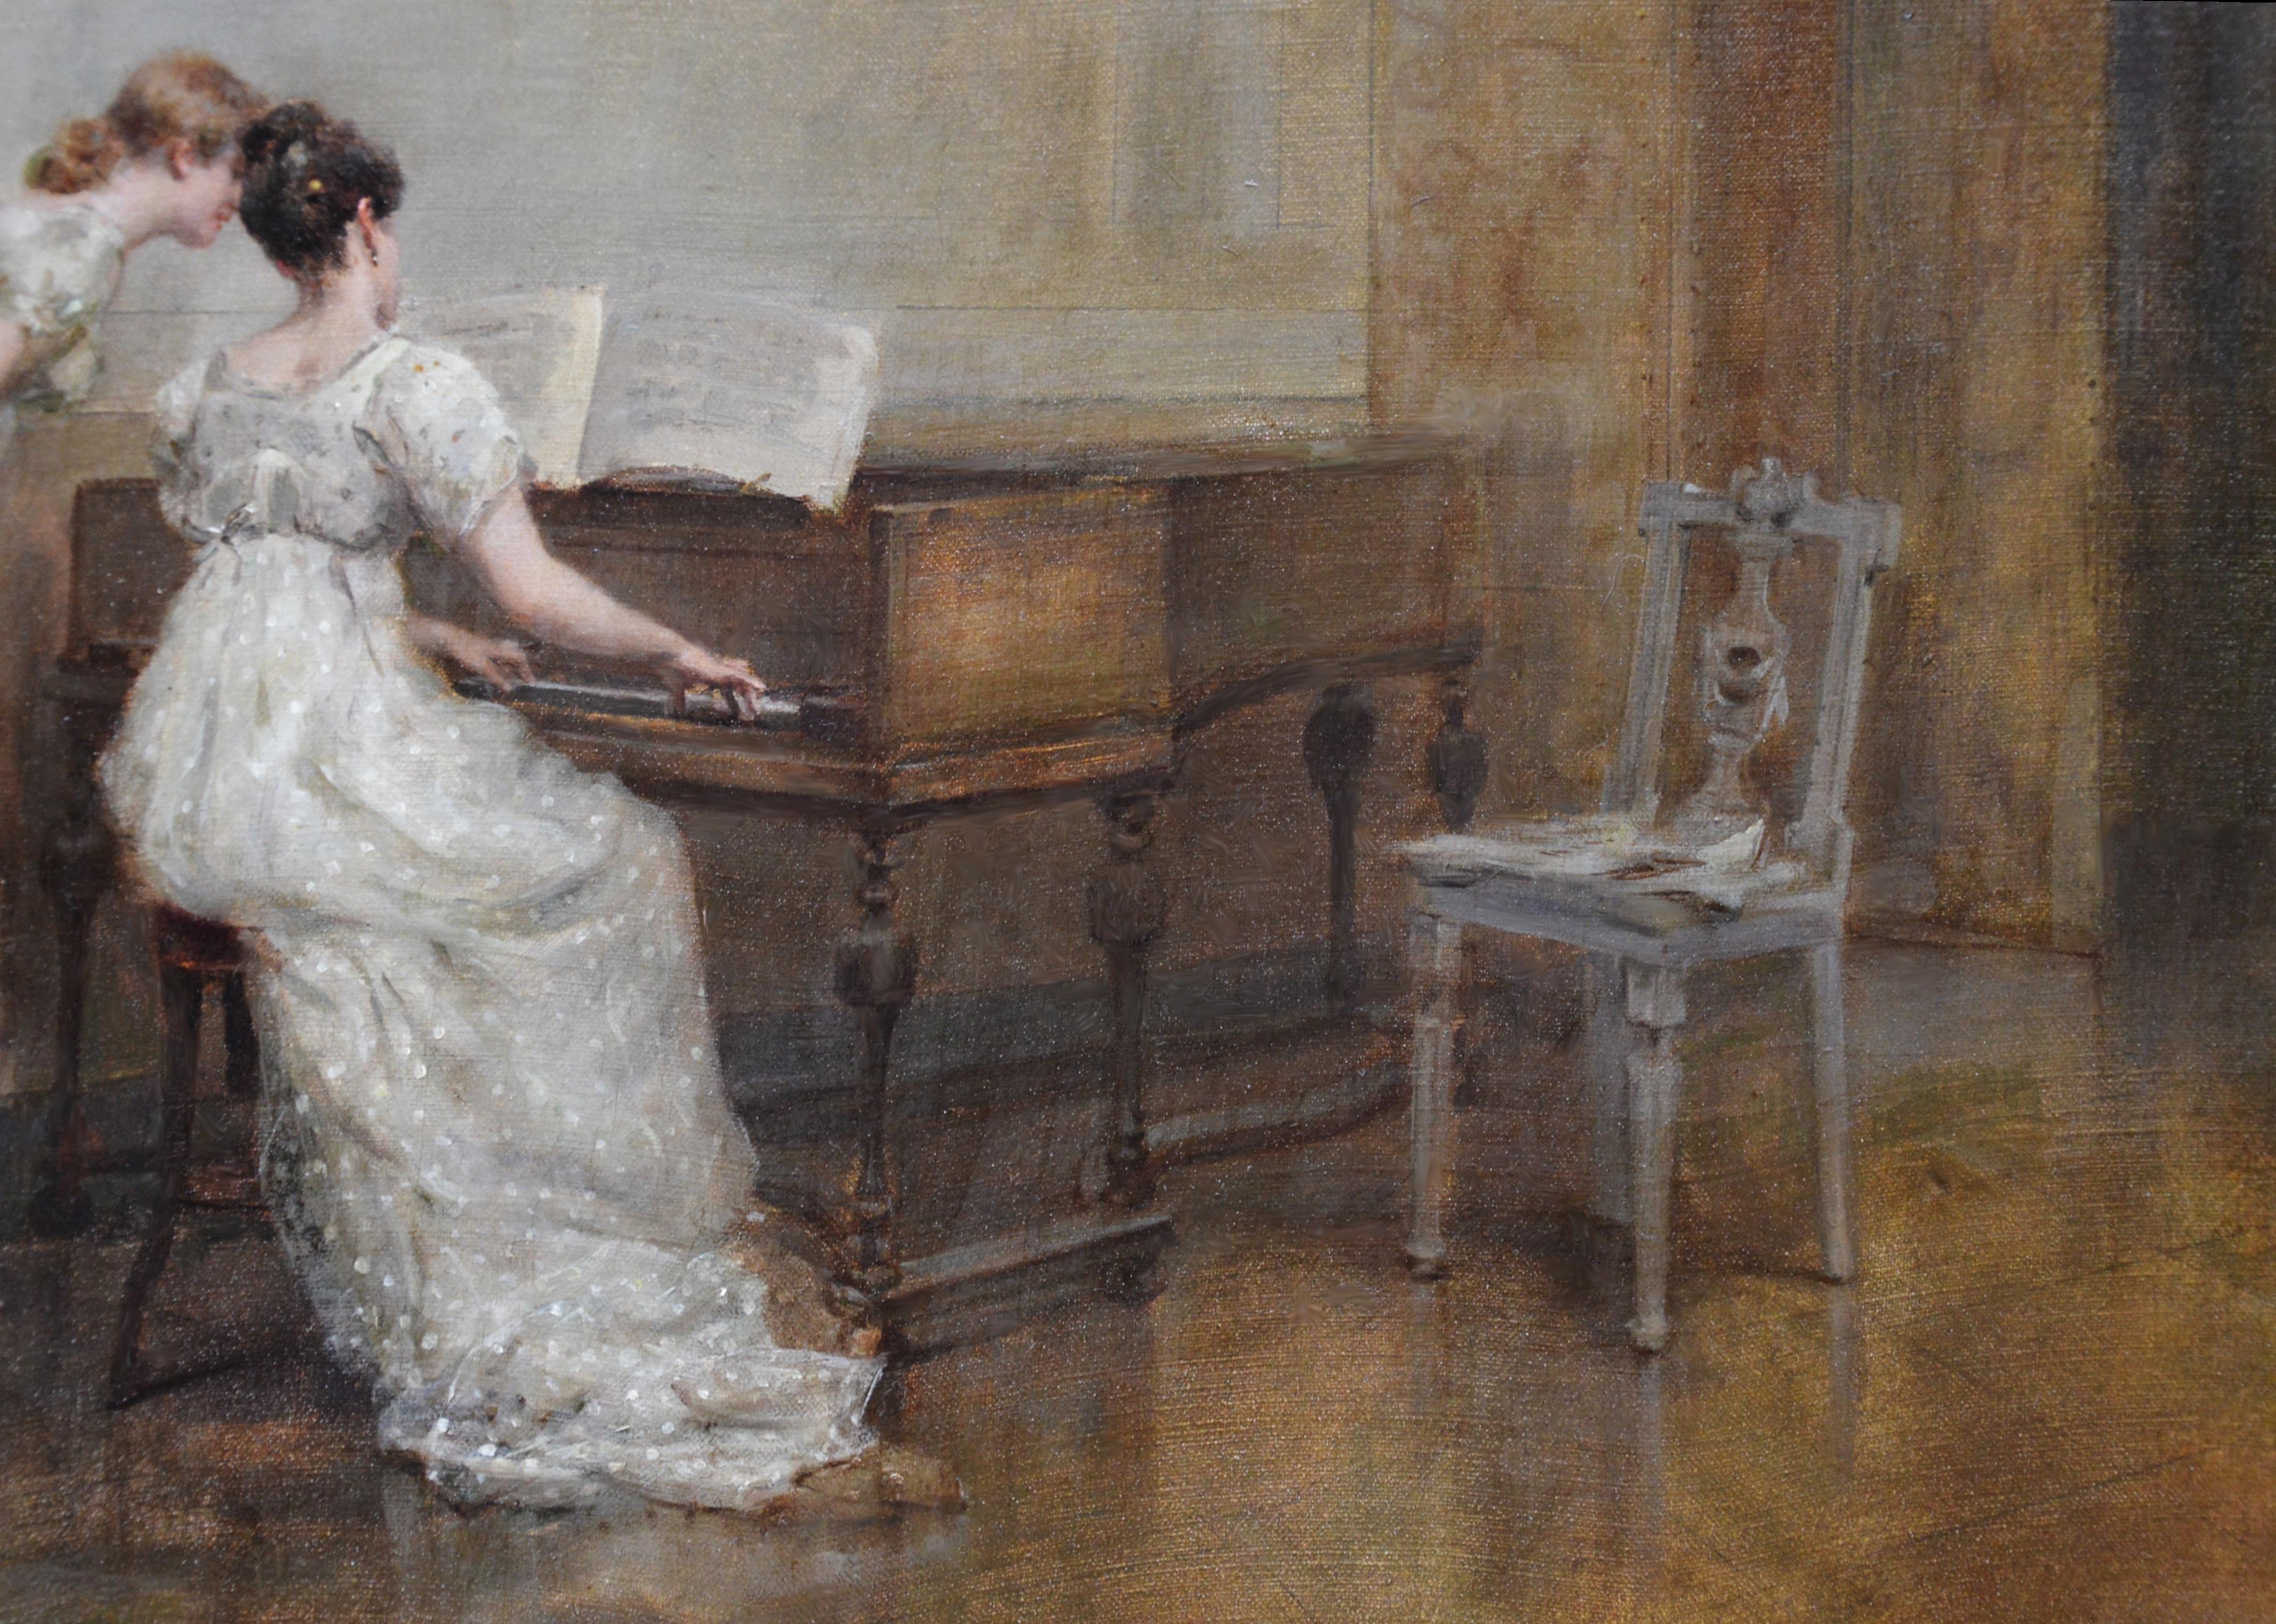 ‘A Little White Note’ by Albert Ludovici Jnr. R.B.A. (1852-1932). The painting was exhibited at the Royal Society of British Artists in London in 1881. It is signed and dated and hangs in a newly commissioned, bespoke gold metal leaf frame.  

All